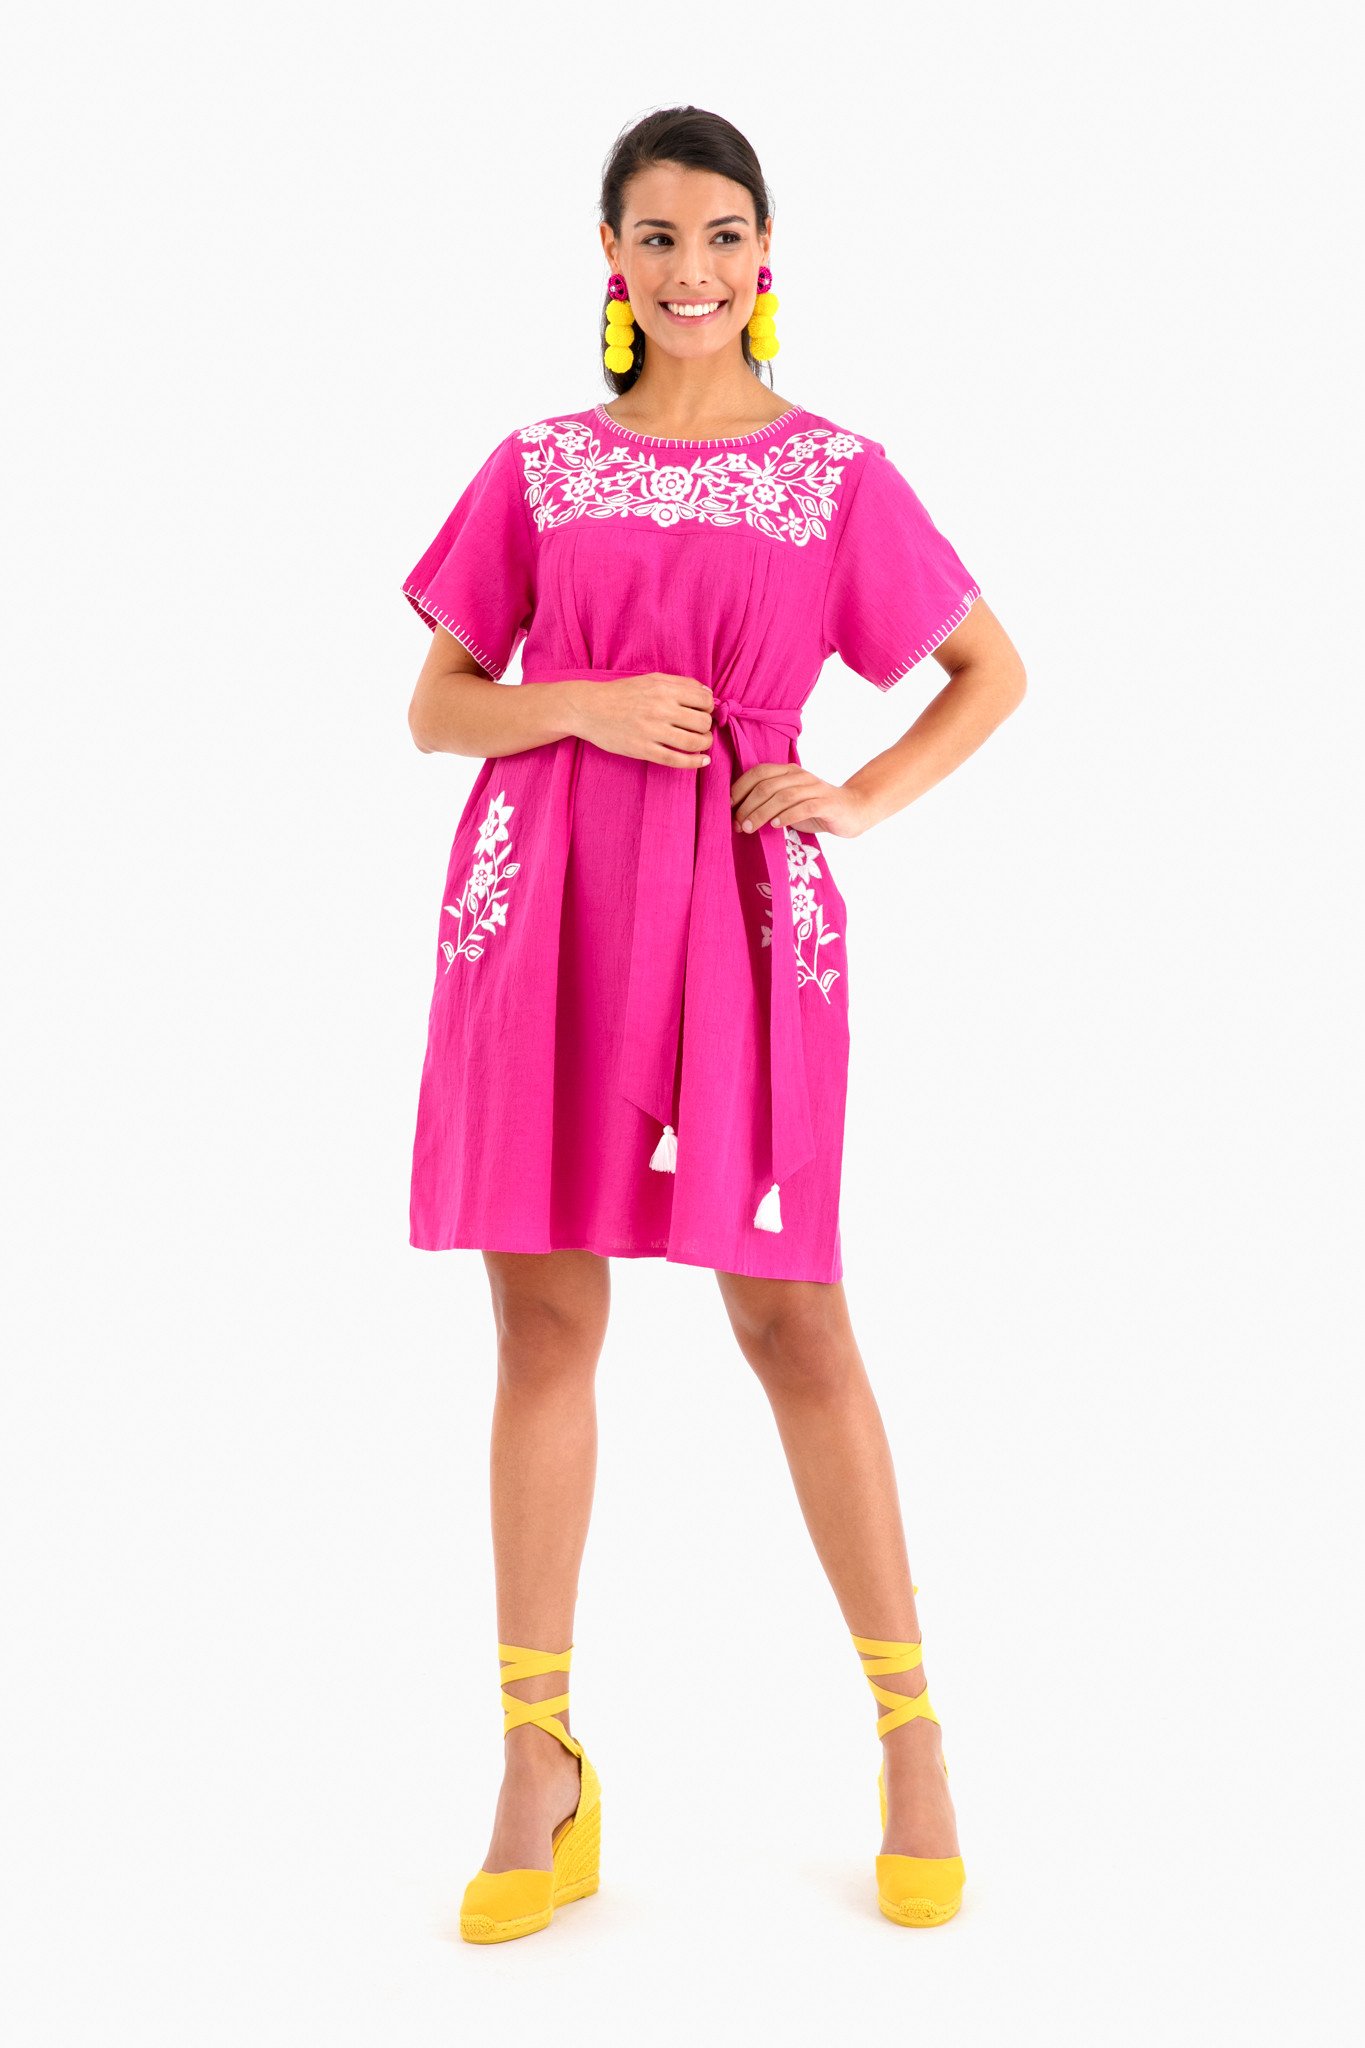 Pink Mexican Dress with White Embroidery and Yellow Espadrilles